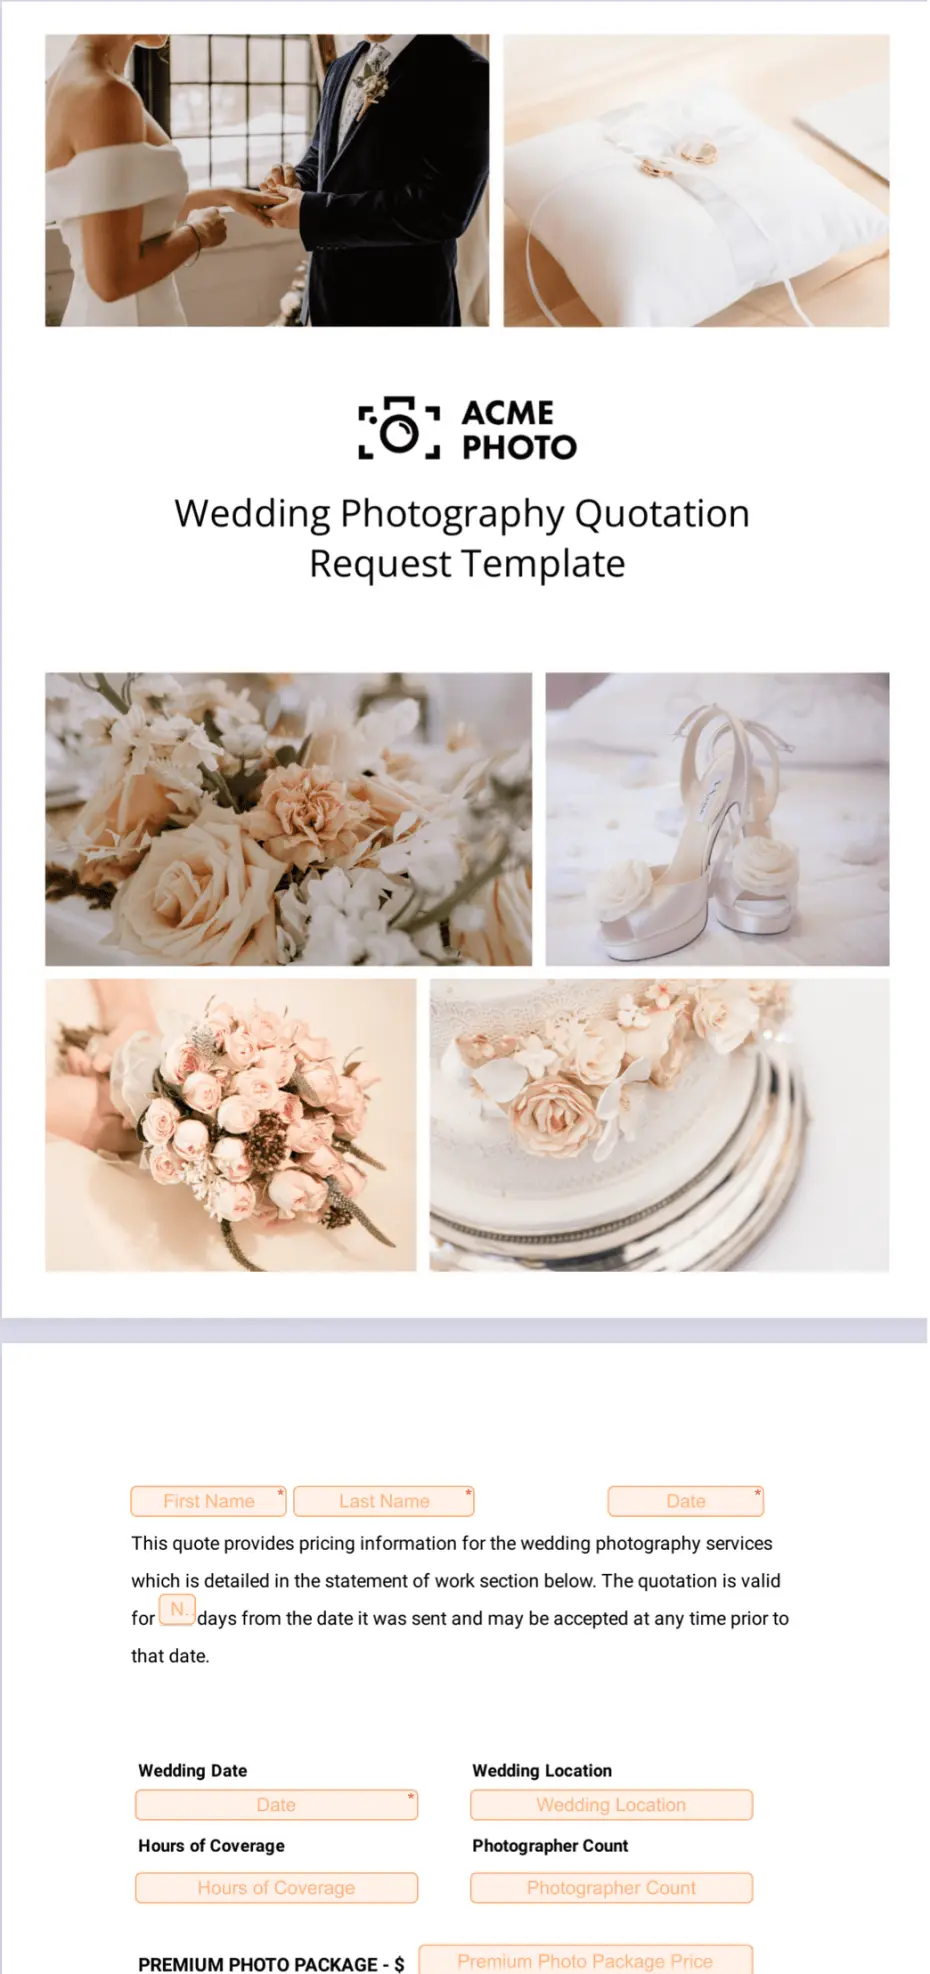 Wedding Photography Quotation Request Template